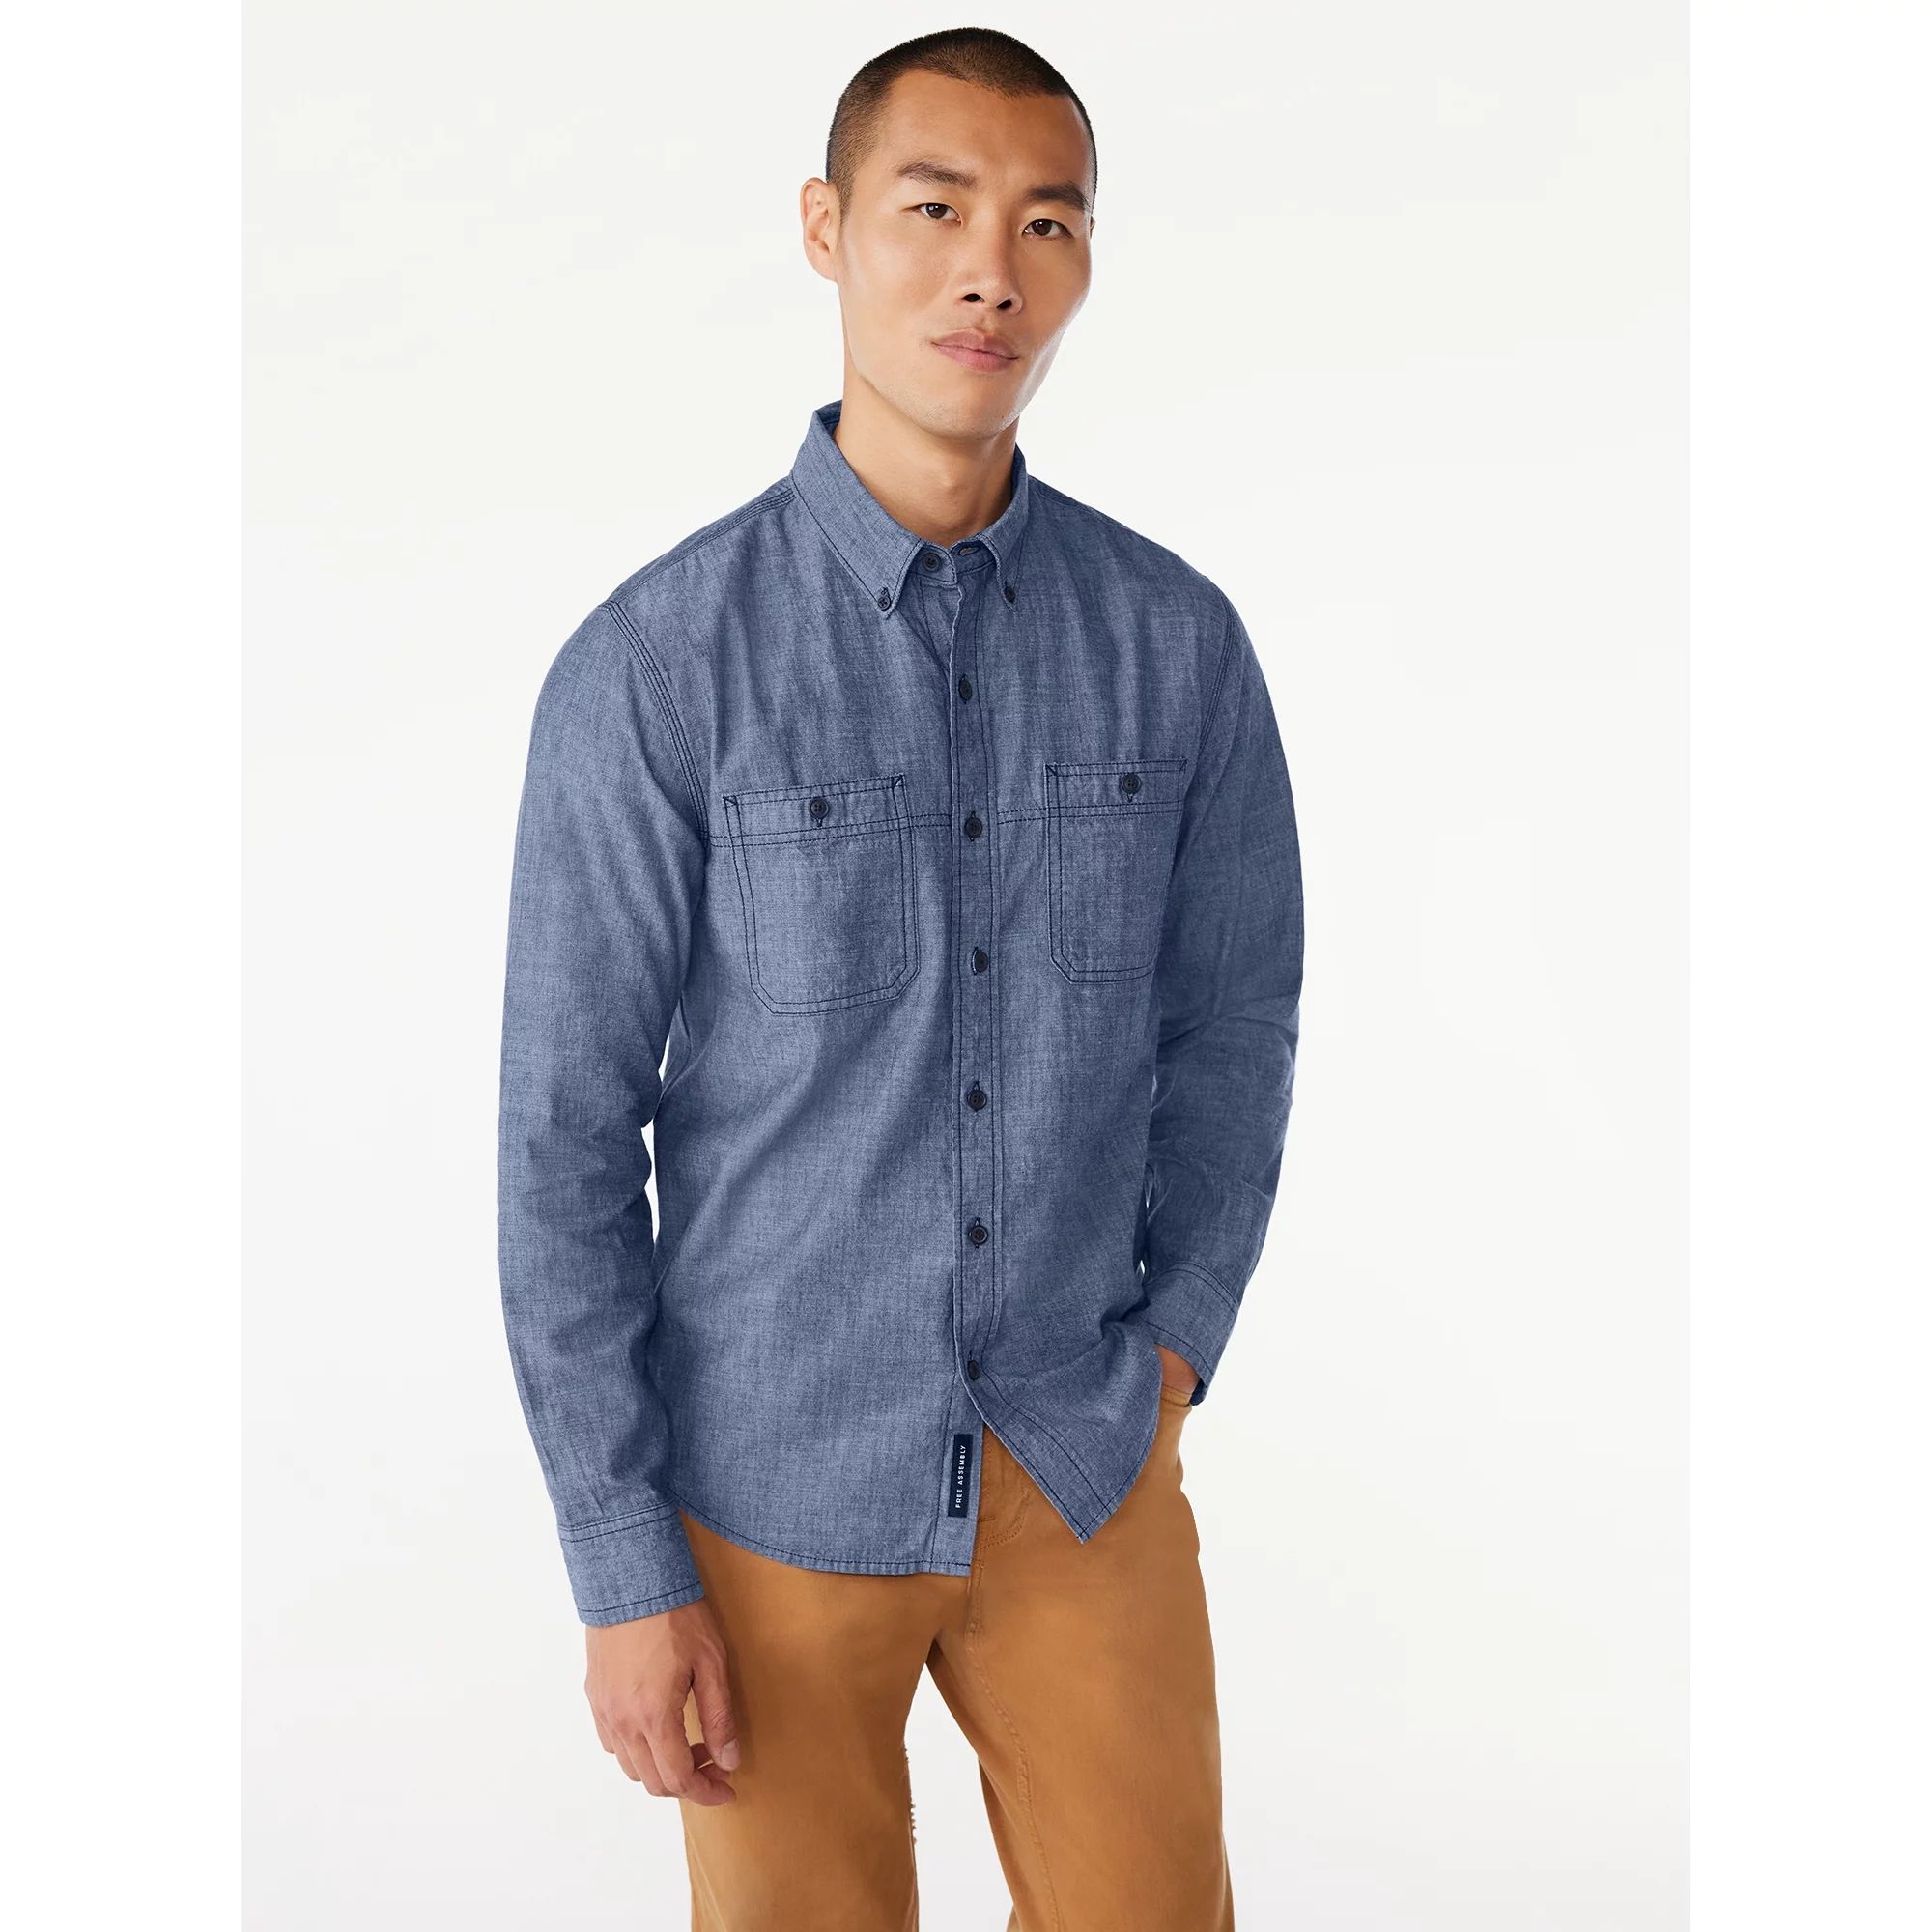 Free Assembly Men's Chambray Shirt with Long Sleeves, Sizes XS-3XL | Walmart (US)